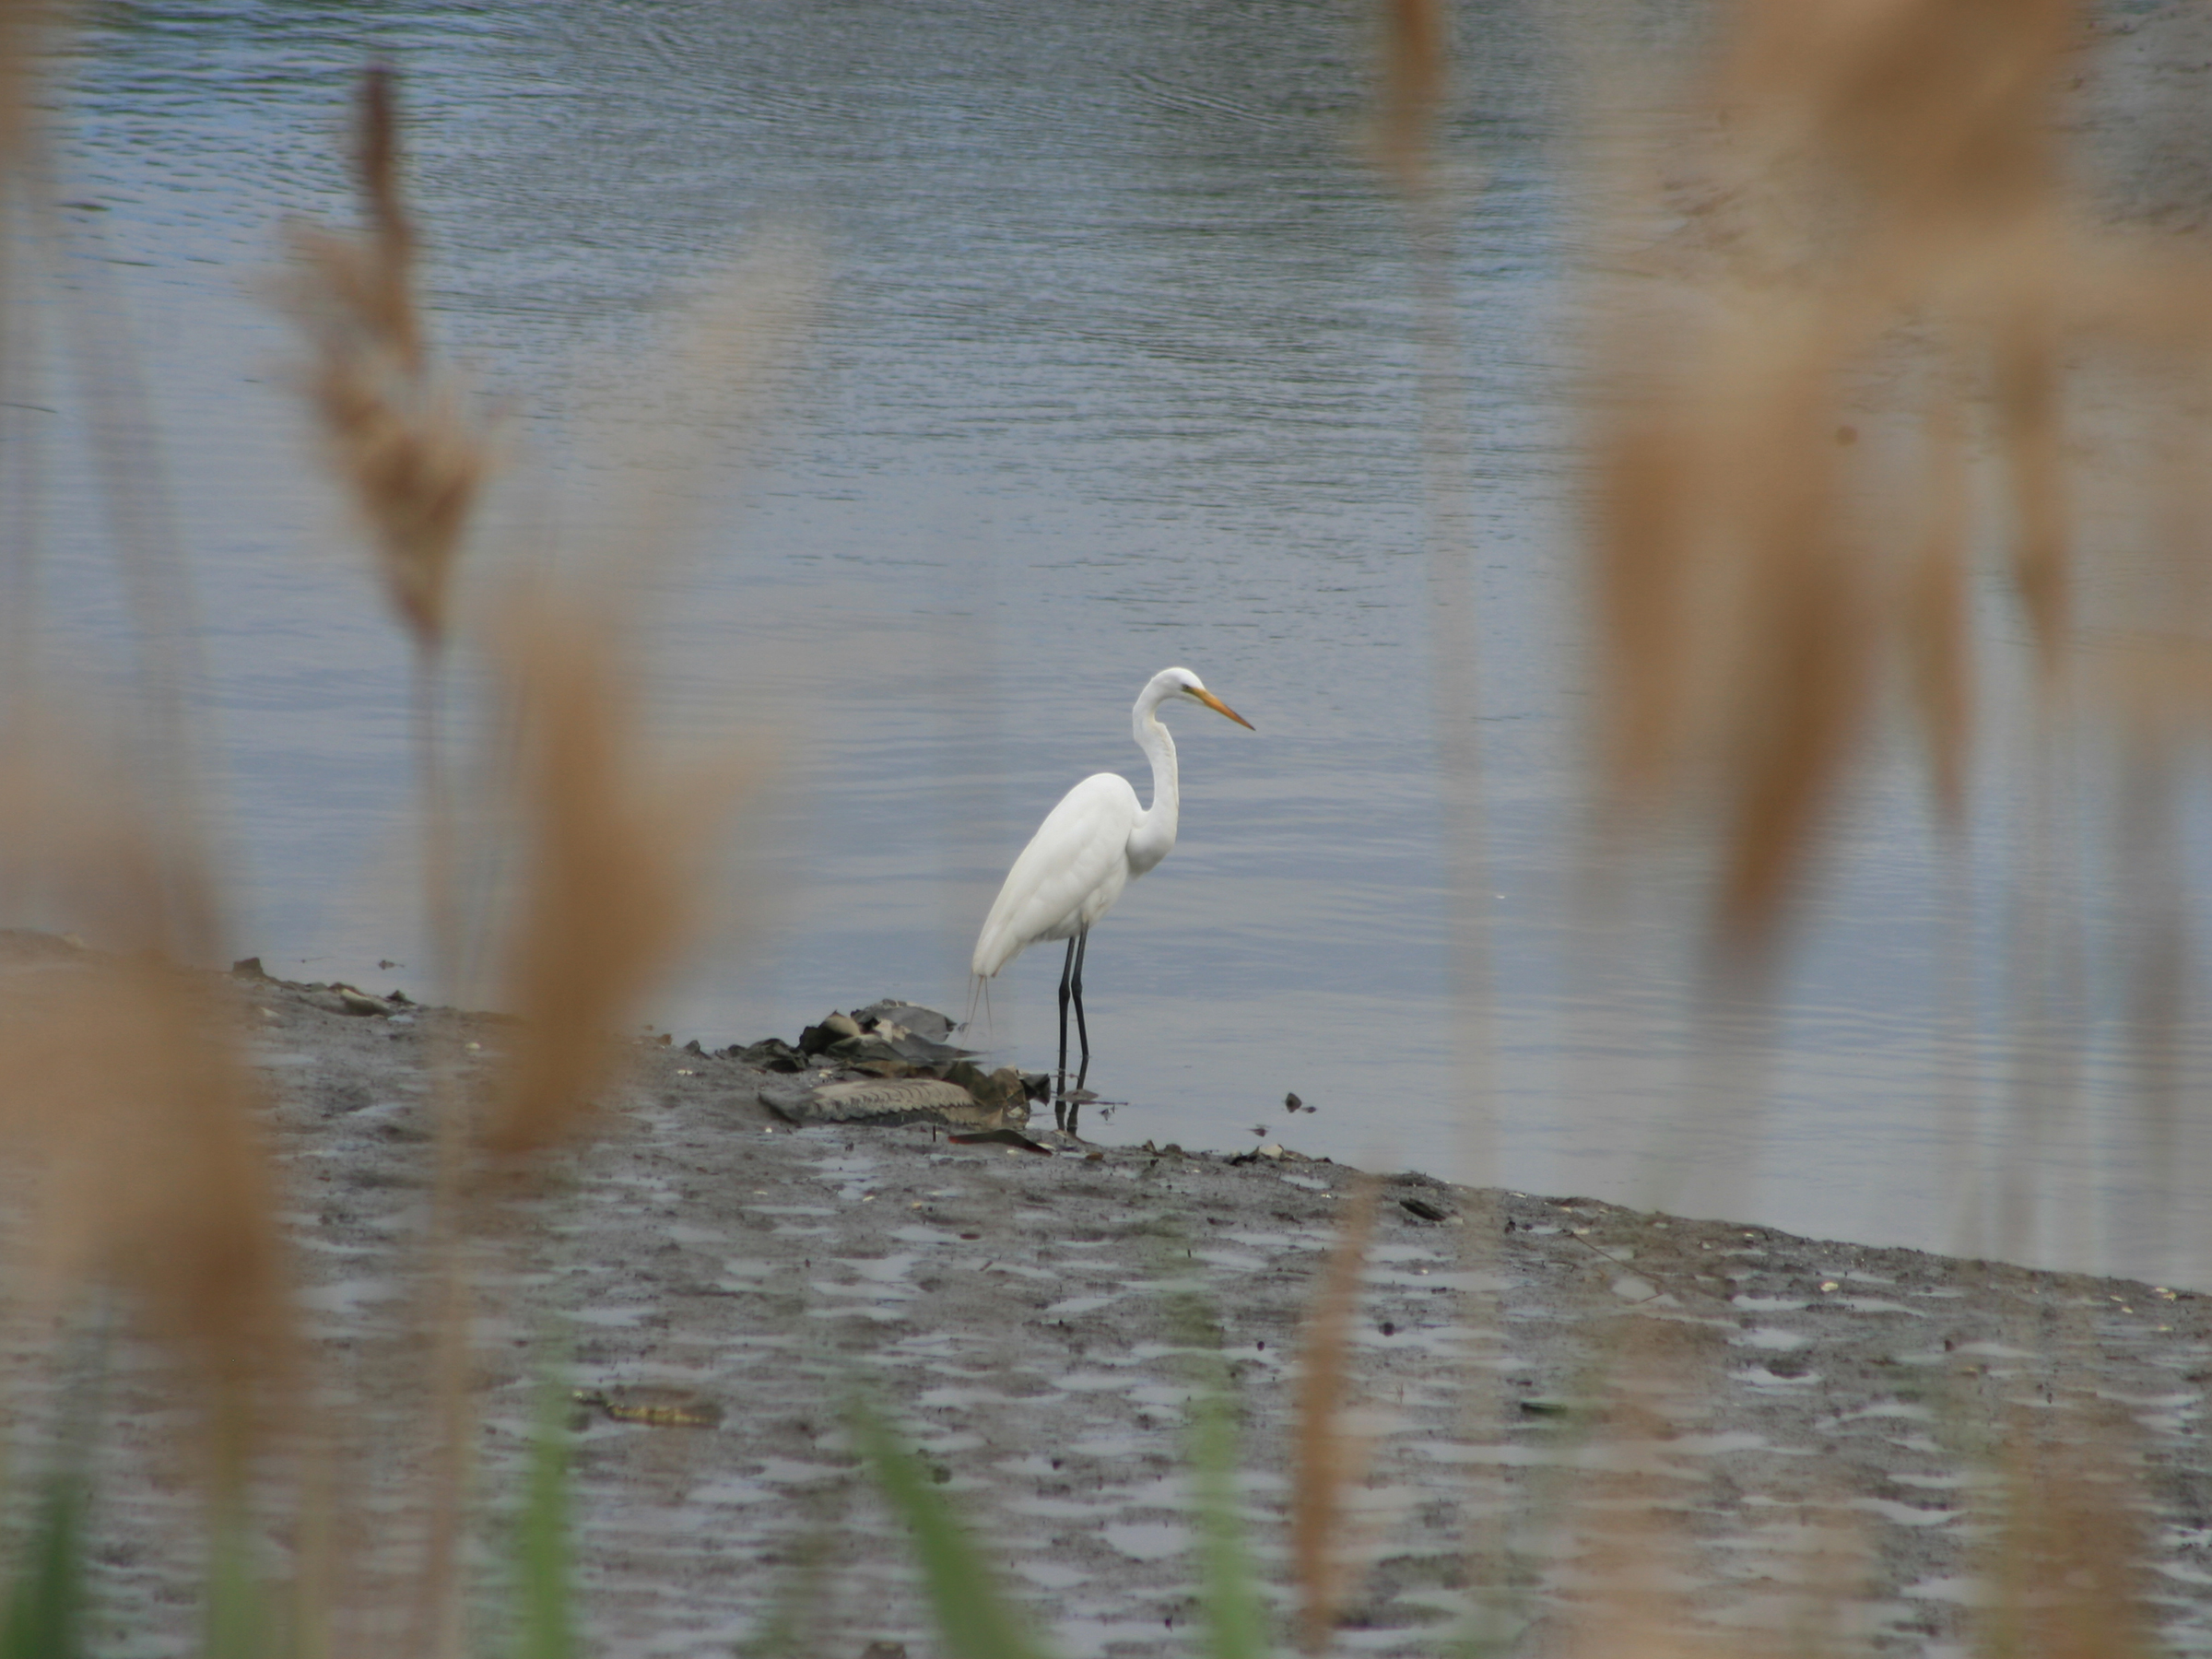 A Great Egret standing on the shore line